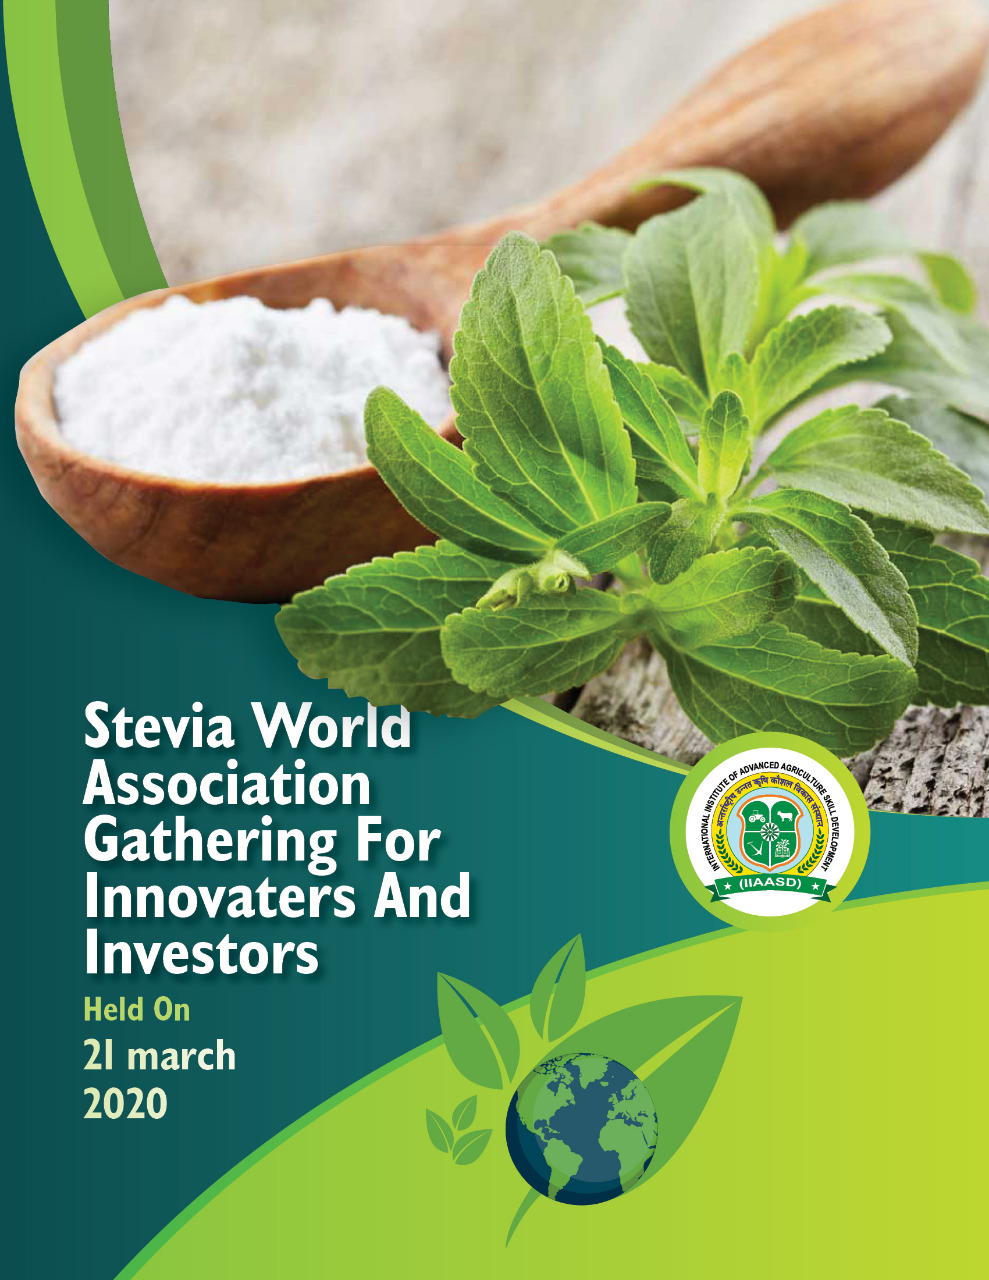 Stevia World Association Gathering For Innovaters And Investors to be held on 21 March 2020., Jaipur, Rajasthan, India